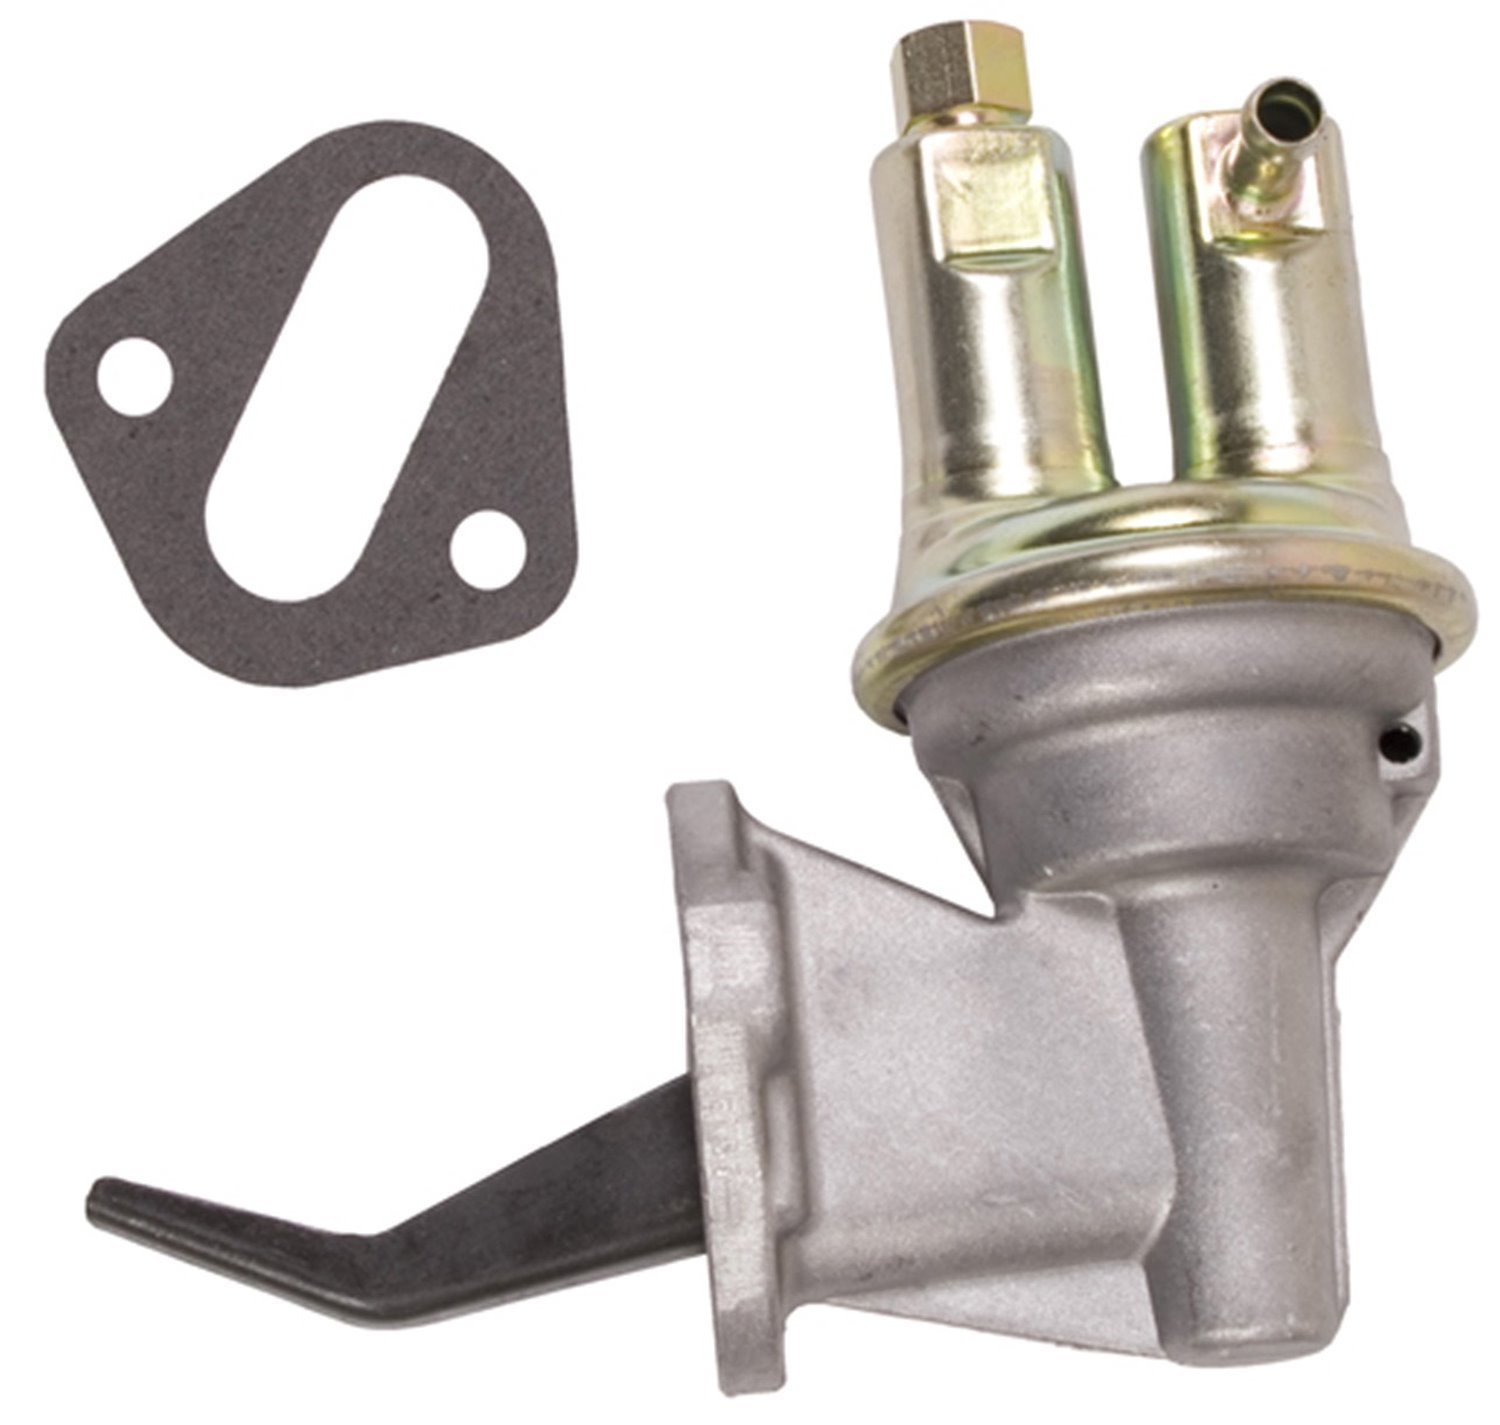 Fuel Pump With Rear Inlet Fitting for Select 1972-90 Jeep Models with 3.8L or 4.2L 6-Cylinder Engine